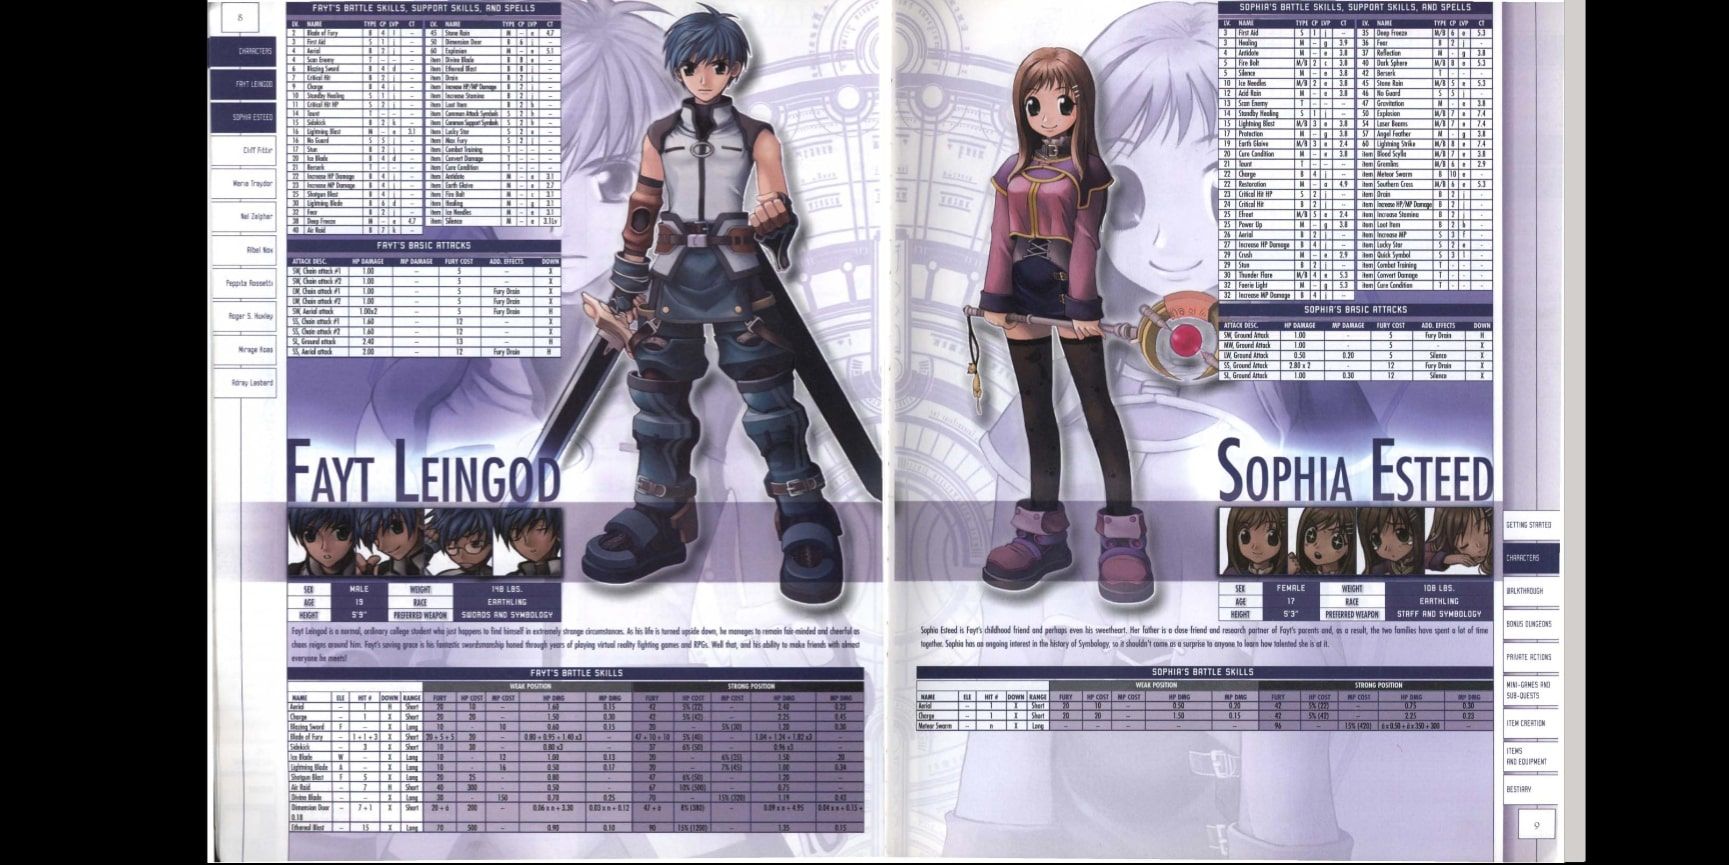 The official strategy guide for Star Ocean: Till The End of Time